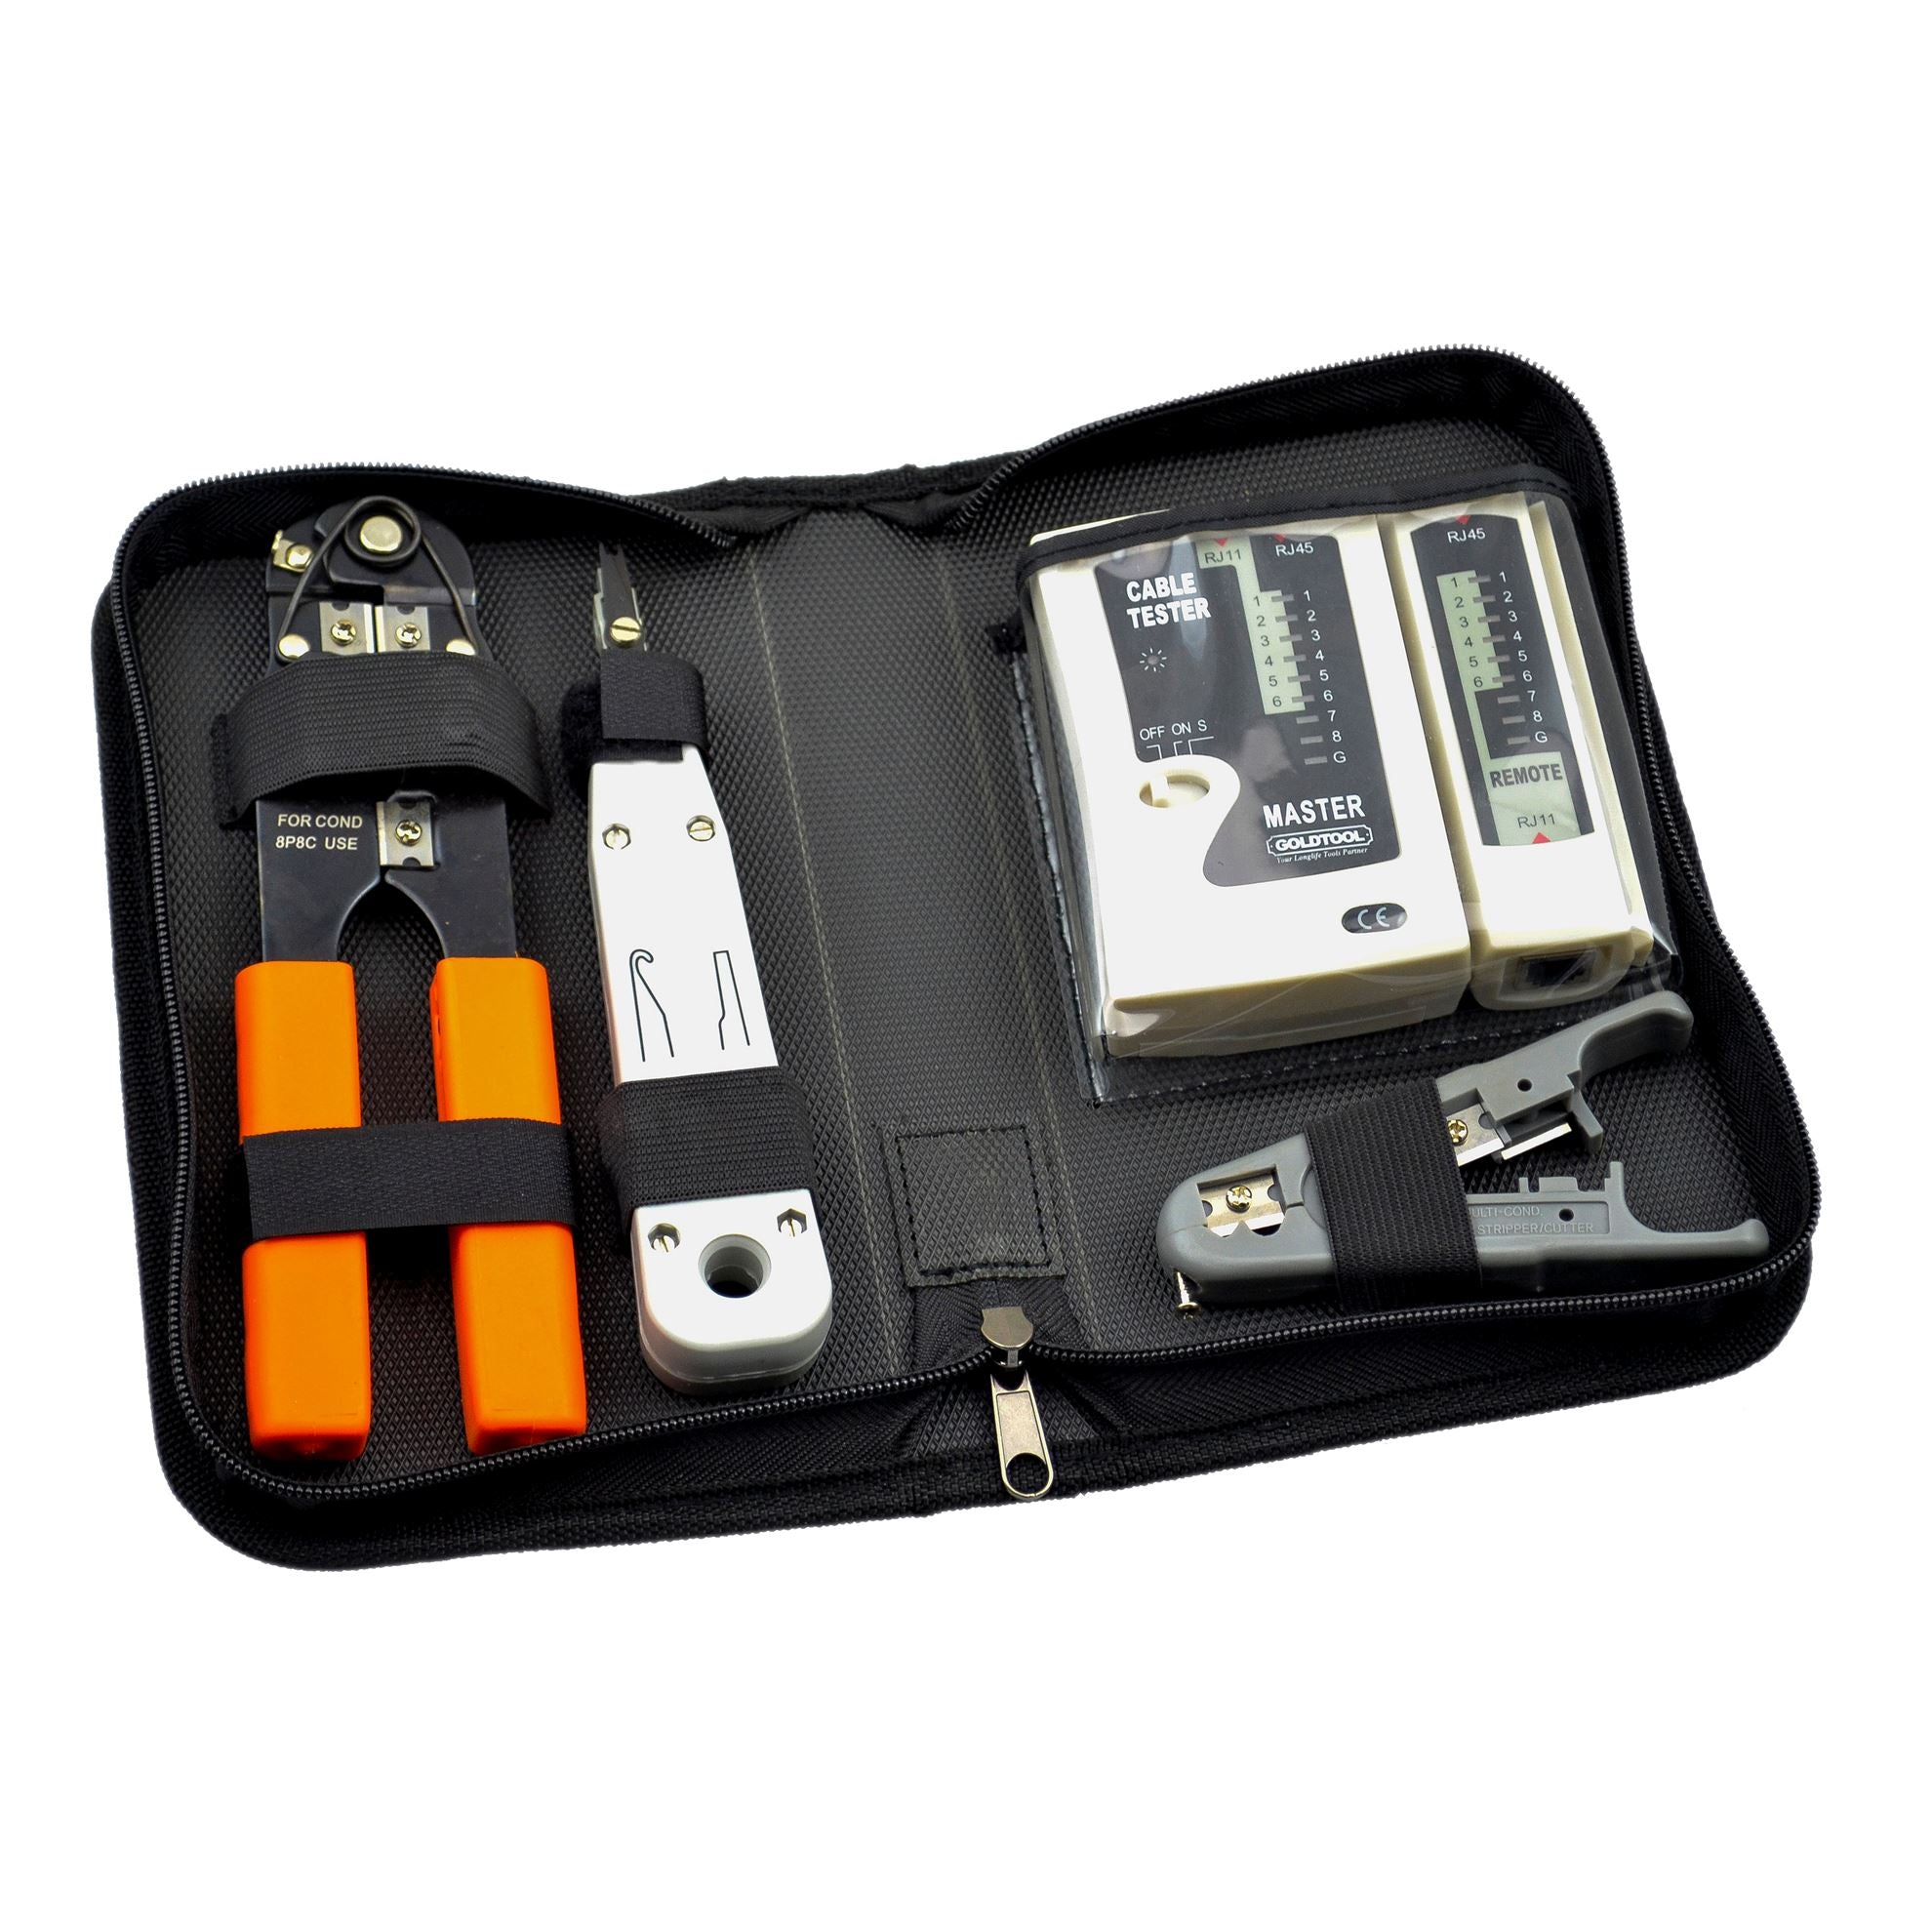 GOLDTOOL_4_Piece_Network_Tool_Kit._Includes_Low_Impact_Insertion_Tool_Modular_Crimping_Tool_Universal_Cable_Stripper_&_Cutter_LAN_Cable_Tester.